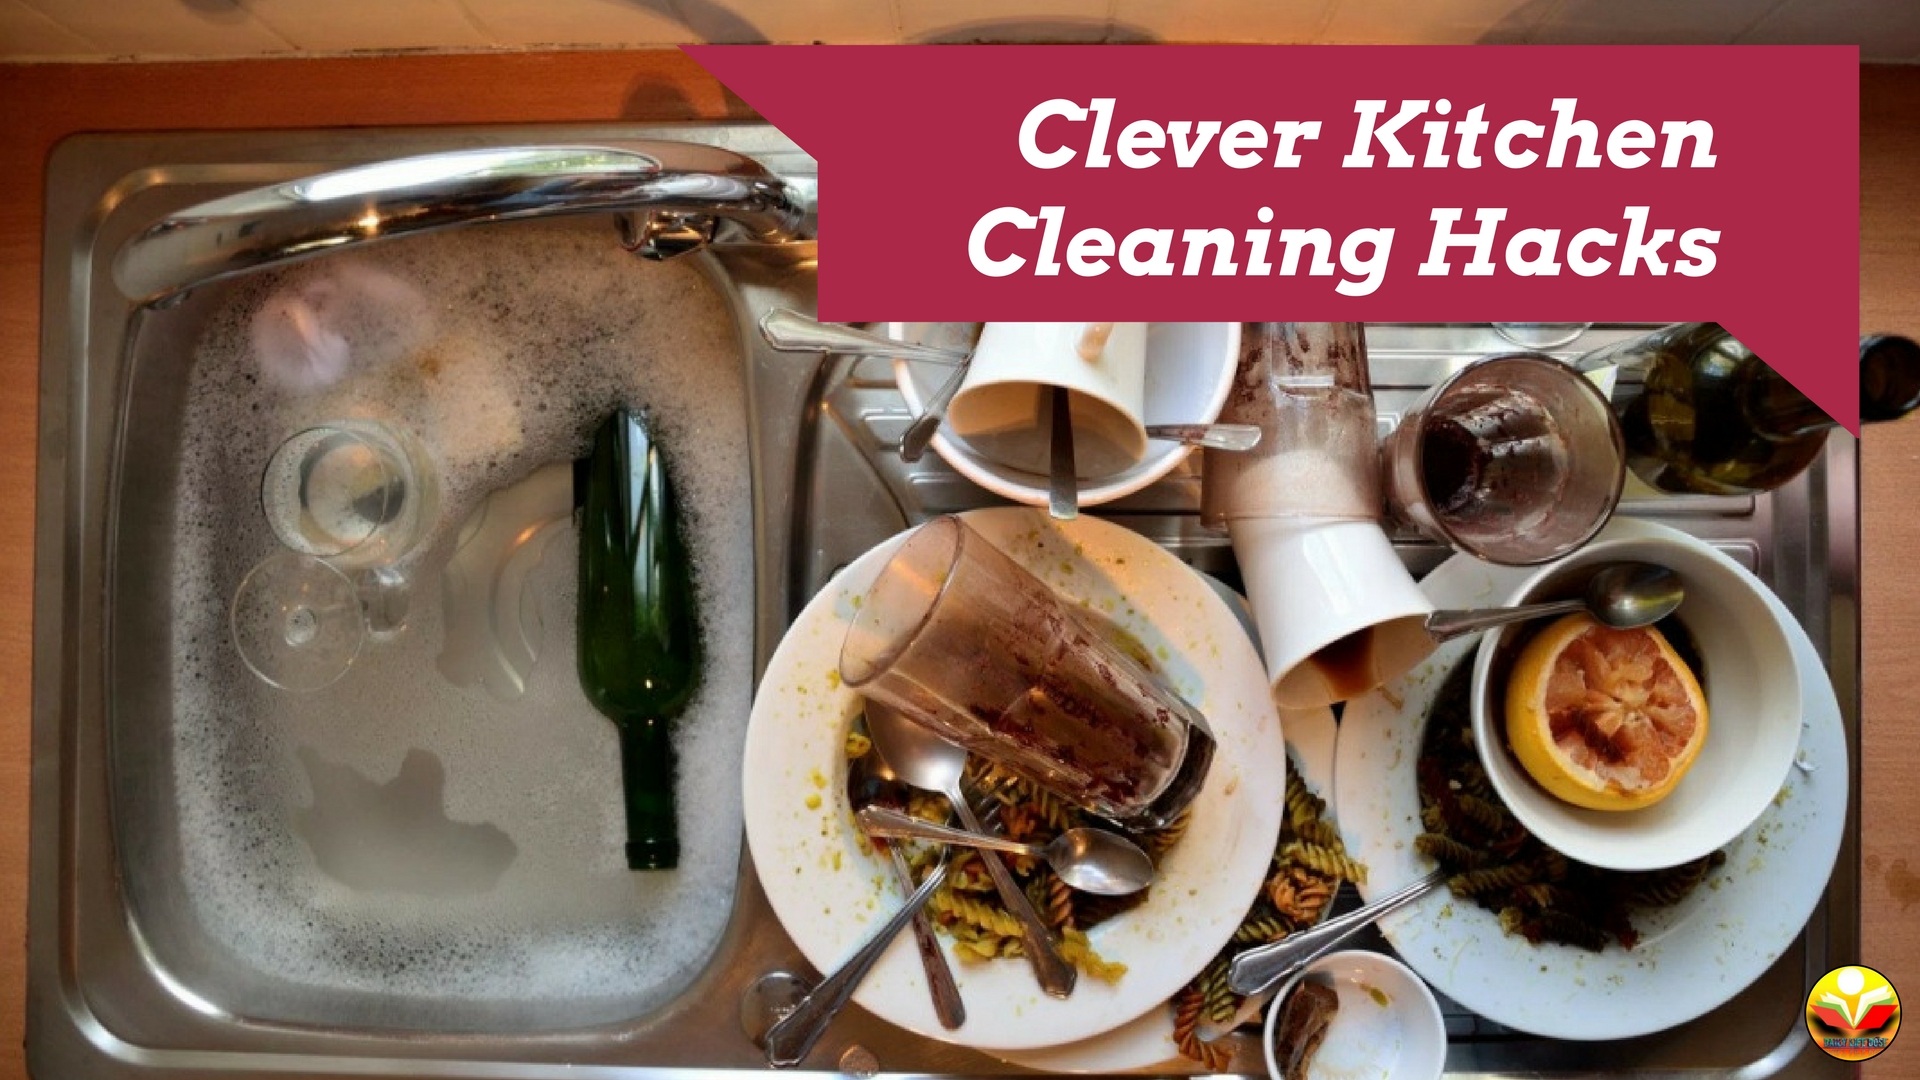 Clever Kitchen Cleaning Hacks - Tips for Daily Life